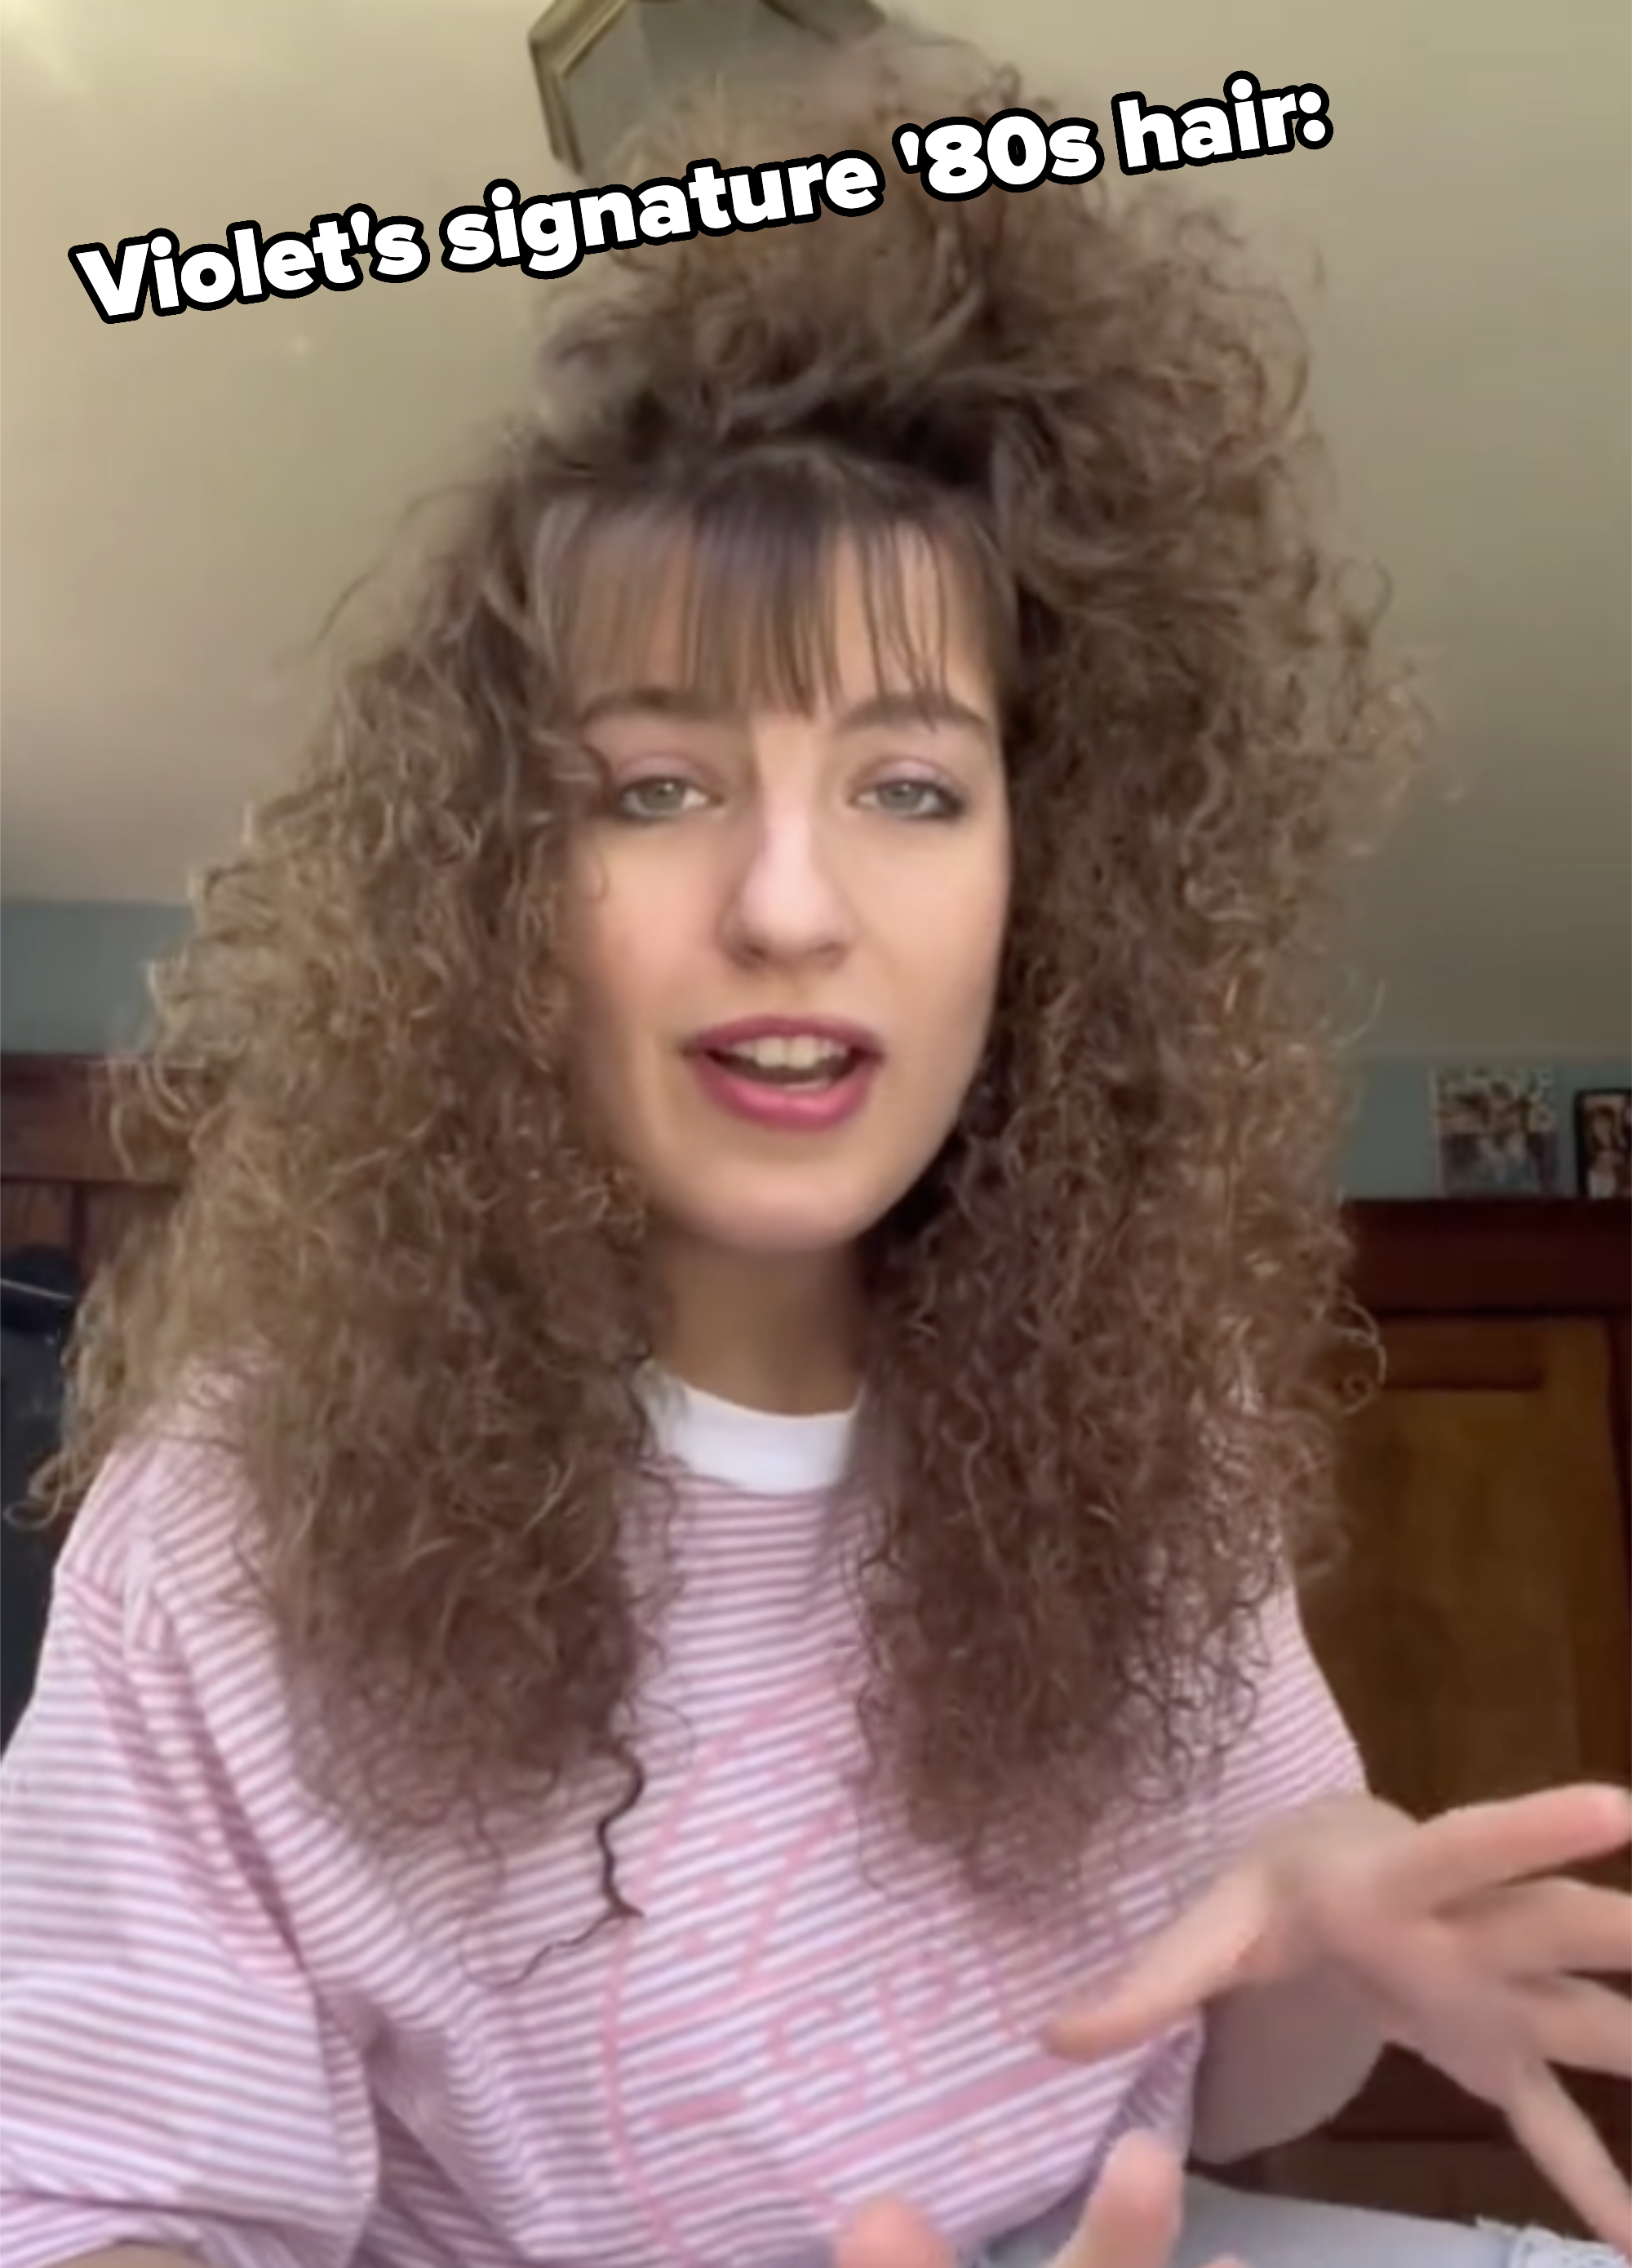 Woman with long, curly hair and bangs in a striped shirt gestures while speaking indoors